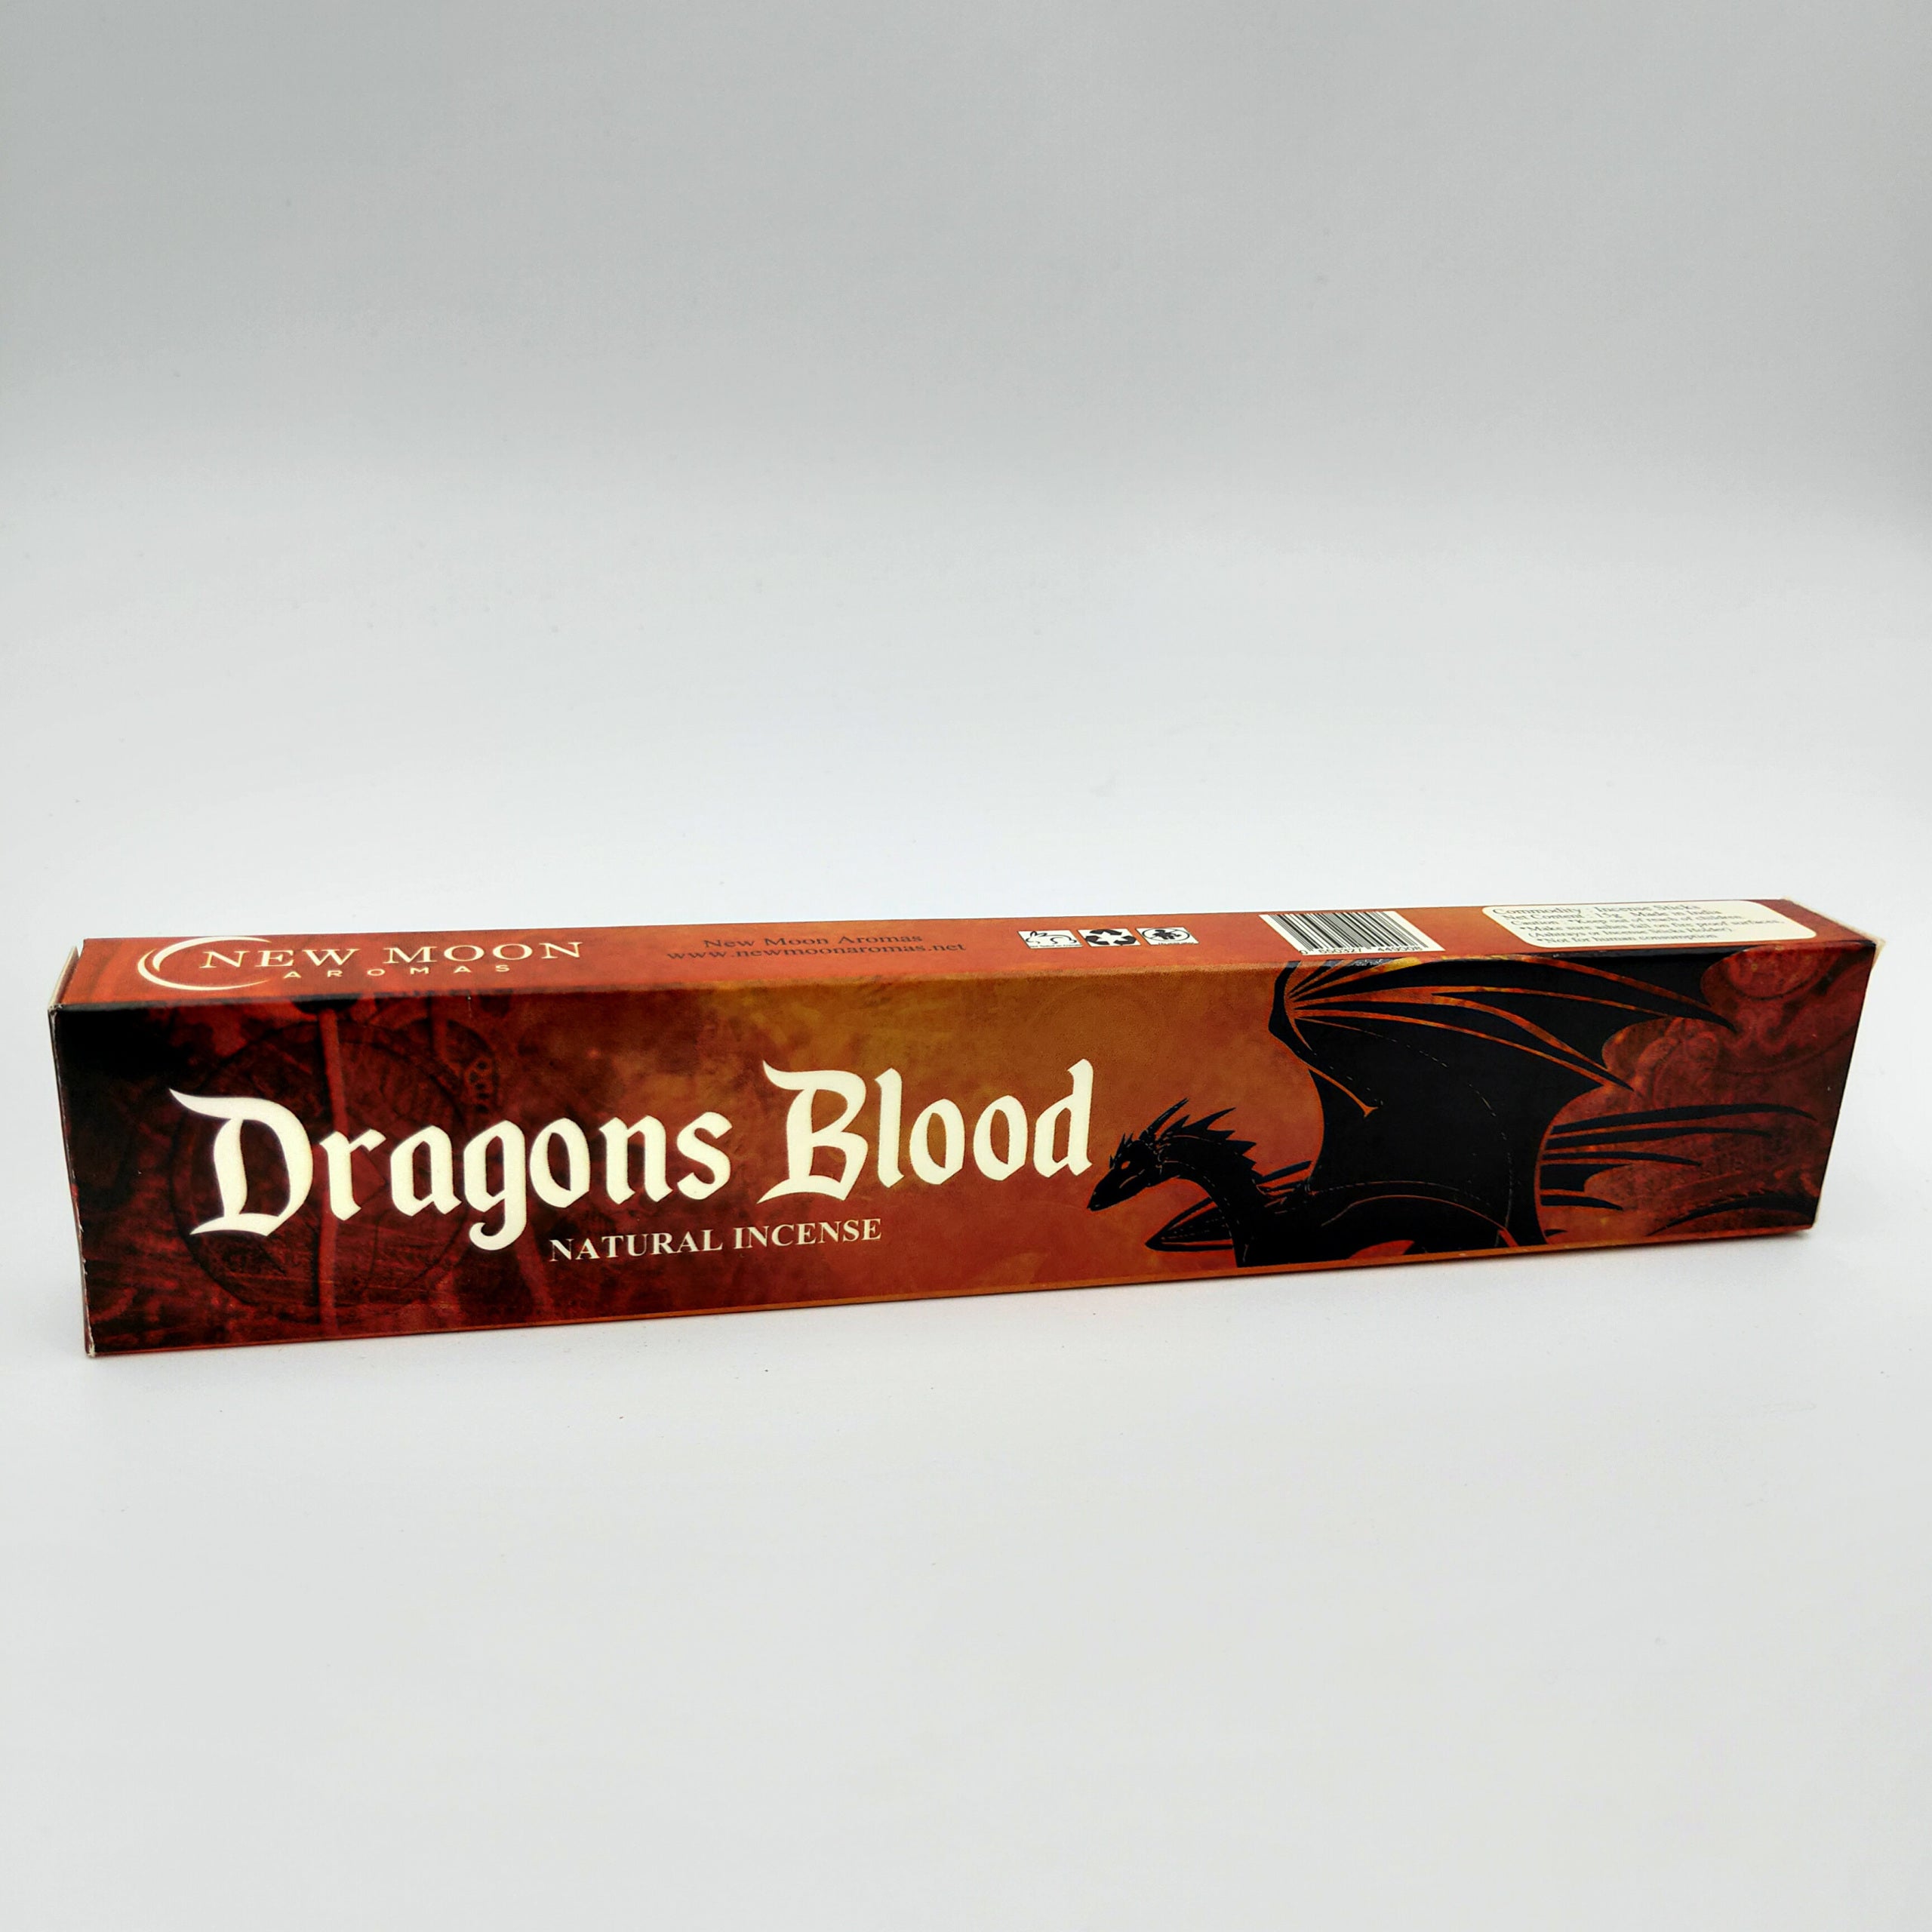 New Moon Dragons Blood Incense